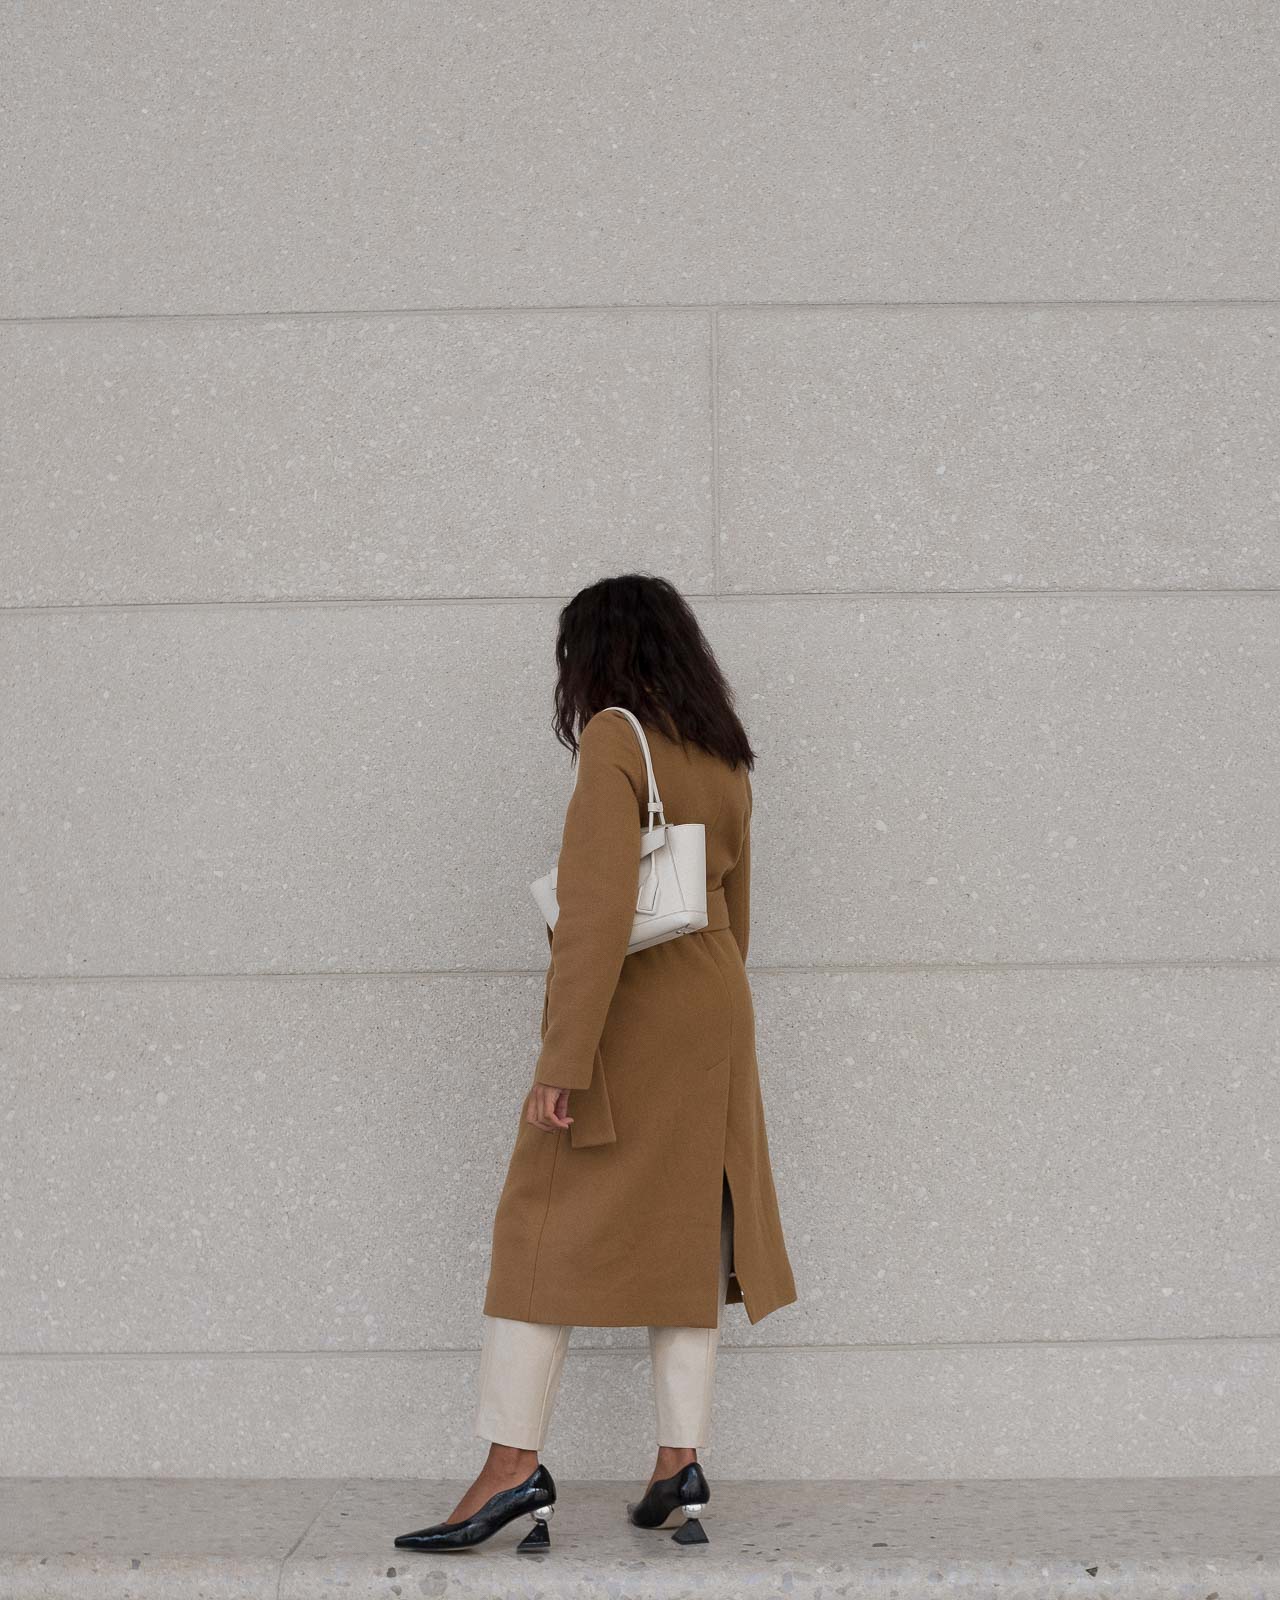 storm wears yuul yie black mules combined with camel coat from by malene birger 